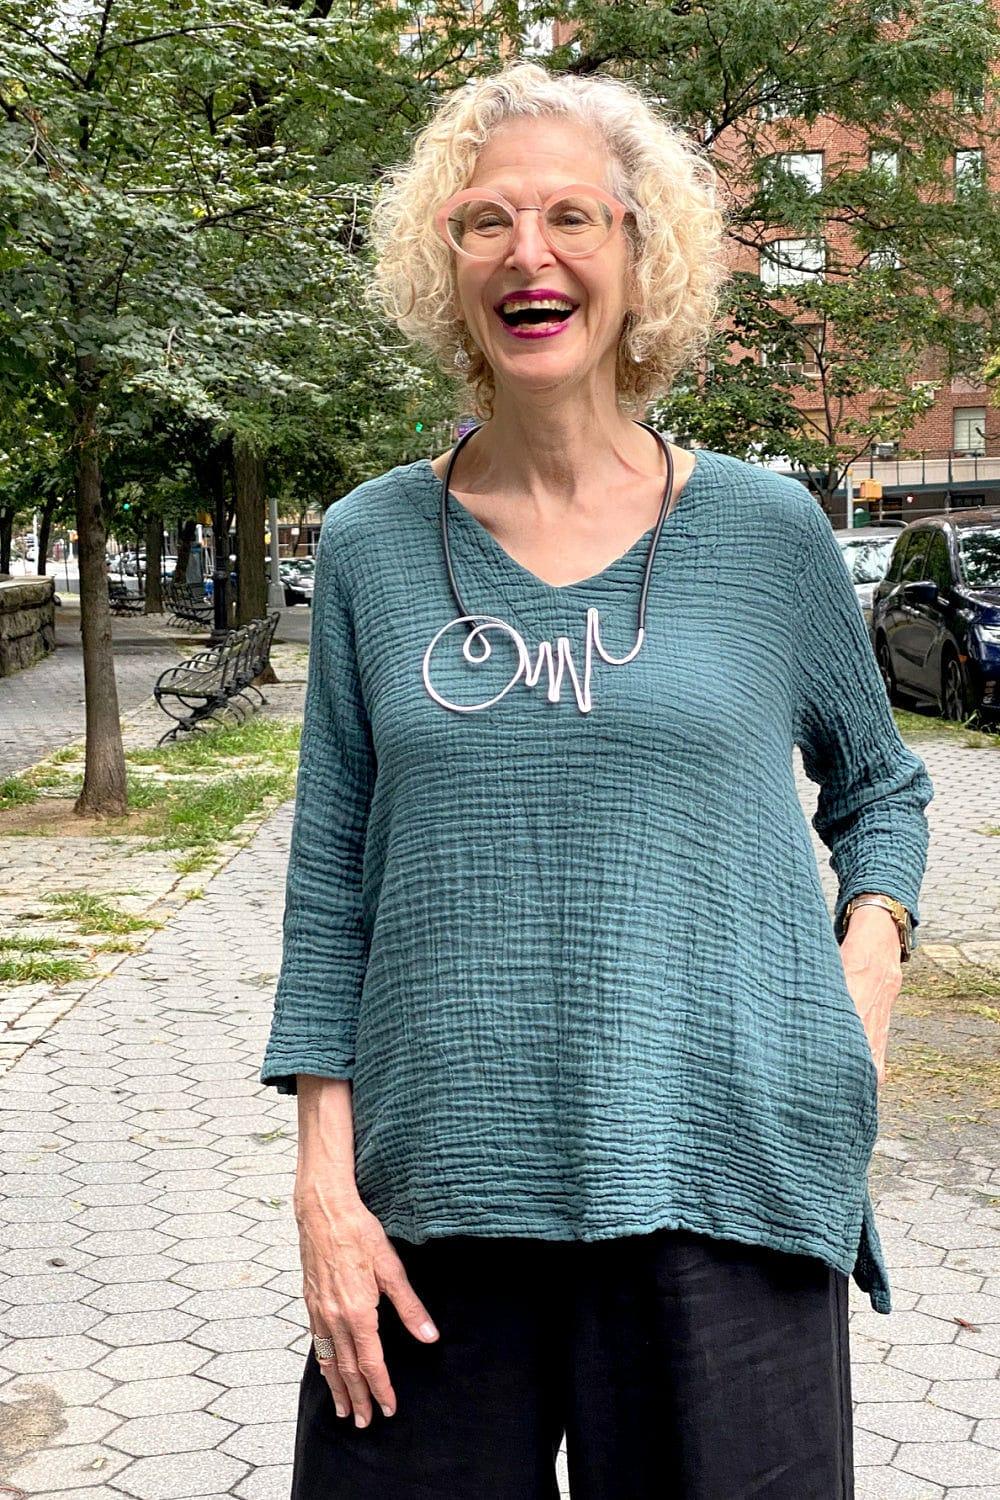 Double Textured Cotton V Neck Top worn on a laughing older model. She is also wearing a silver and black necklace and black loose fit pants.